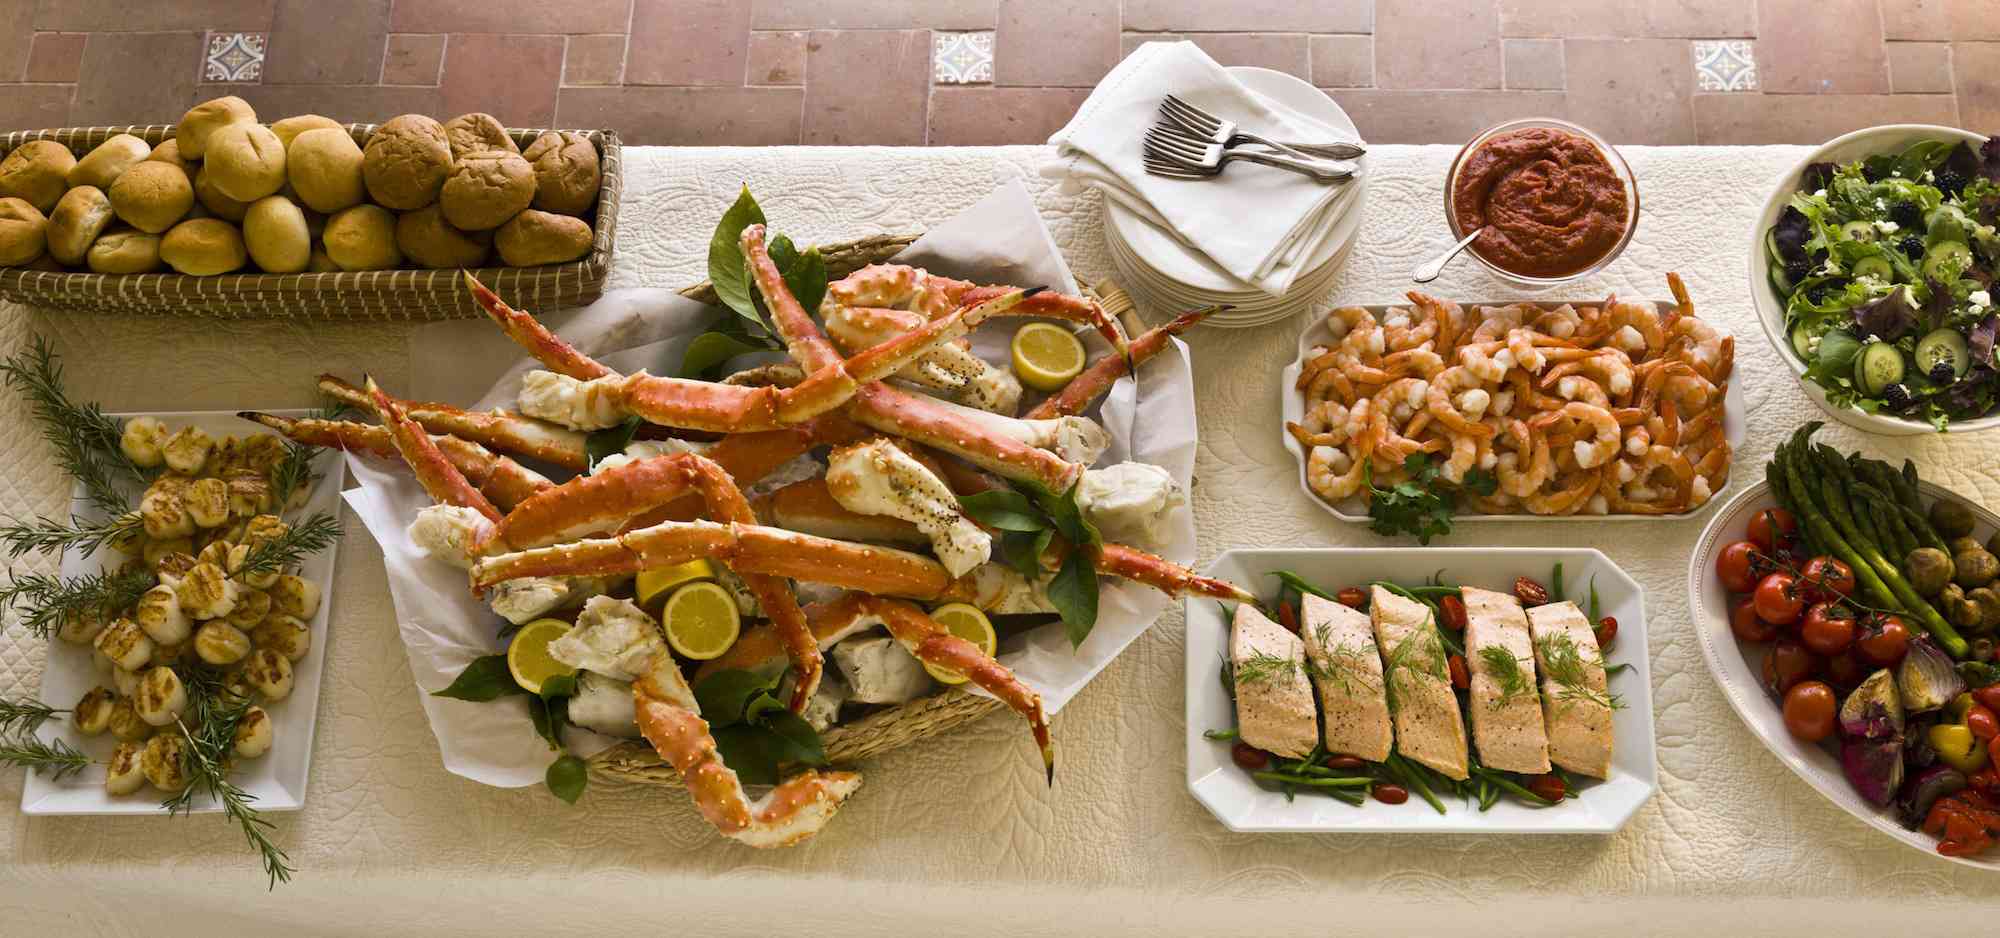 Consider Restaurant Catering As a Great Party Food Option